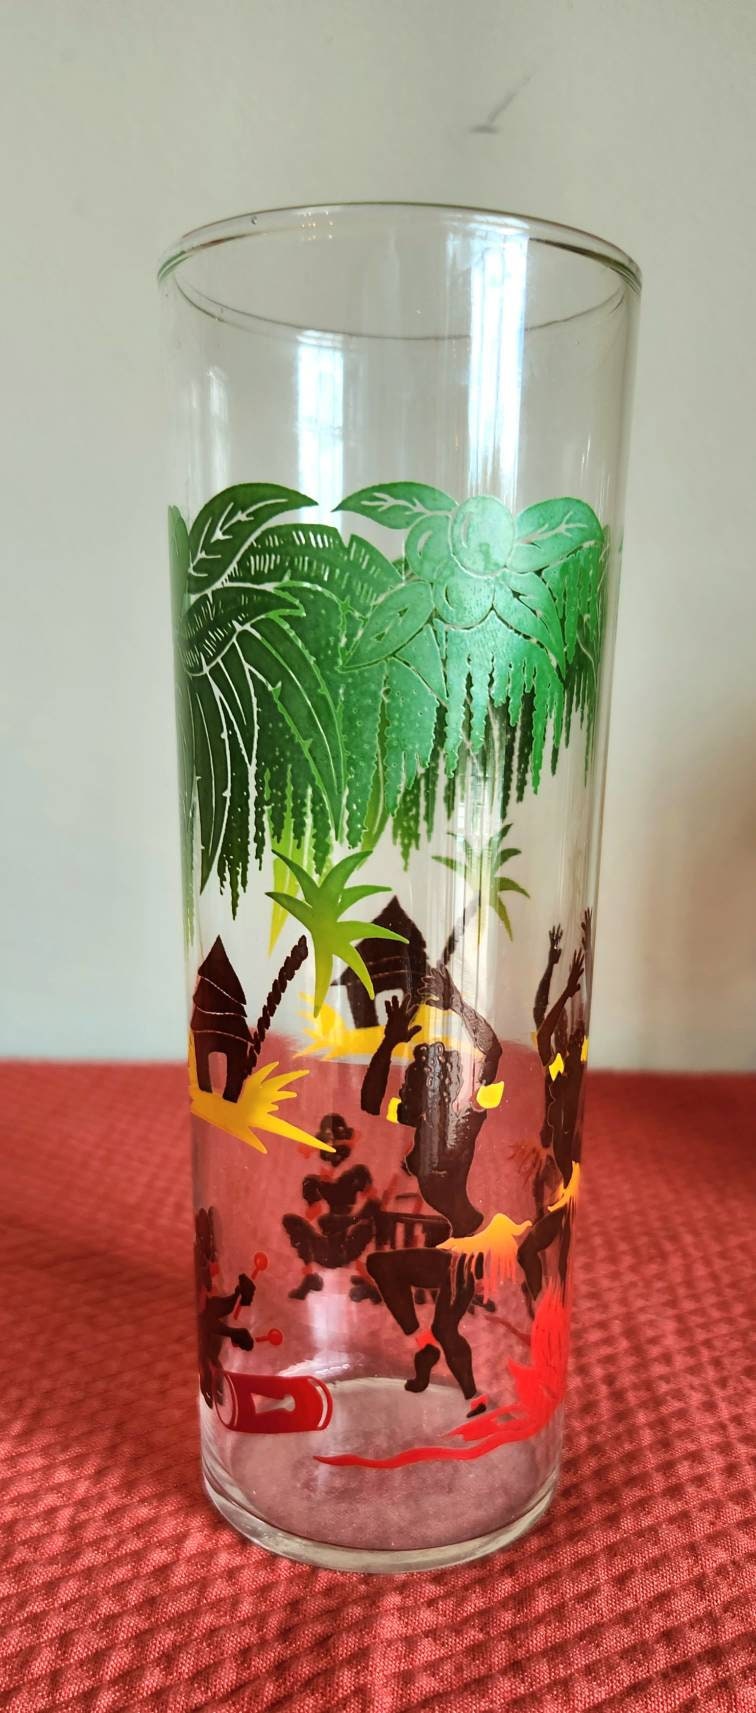 Island Chic Hand-Woven Lattice Tall Drinking Glass at Twisted Sisters!